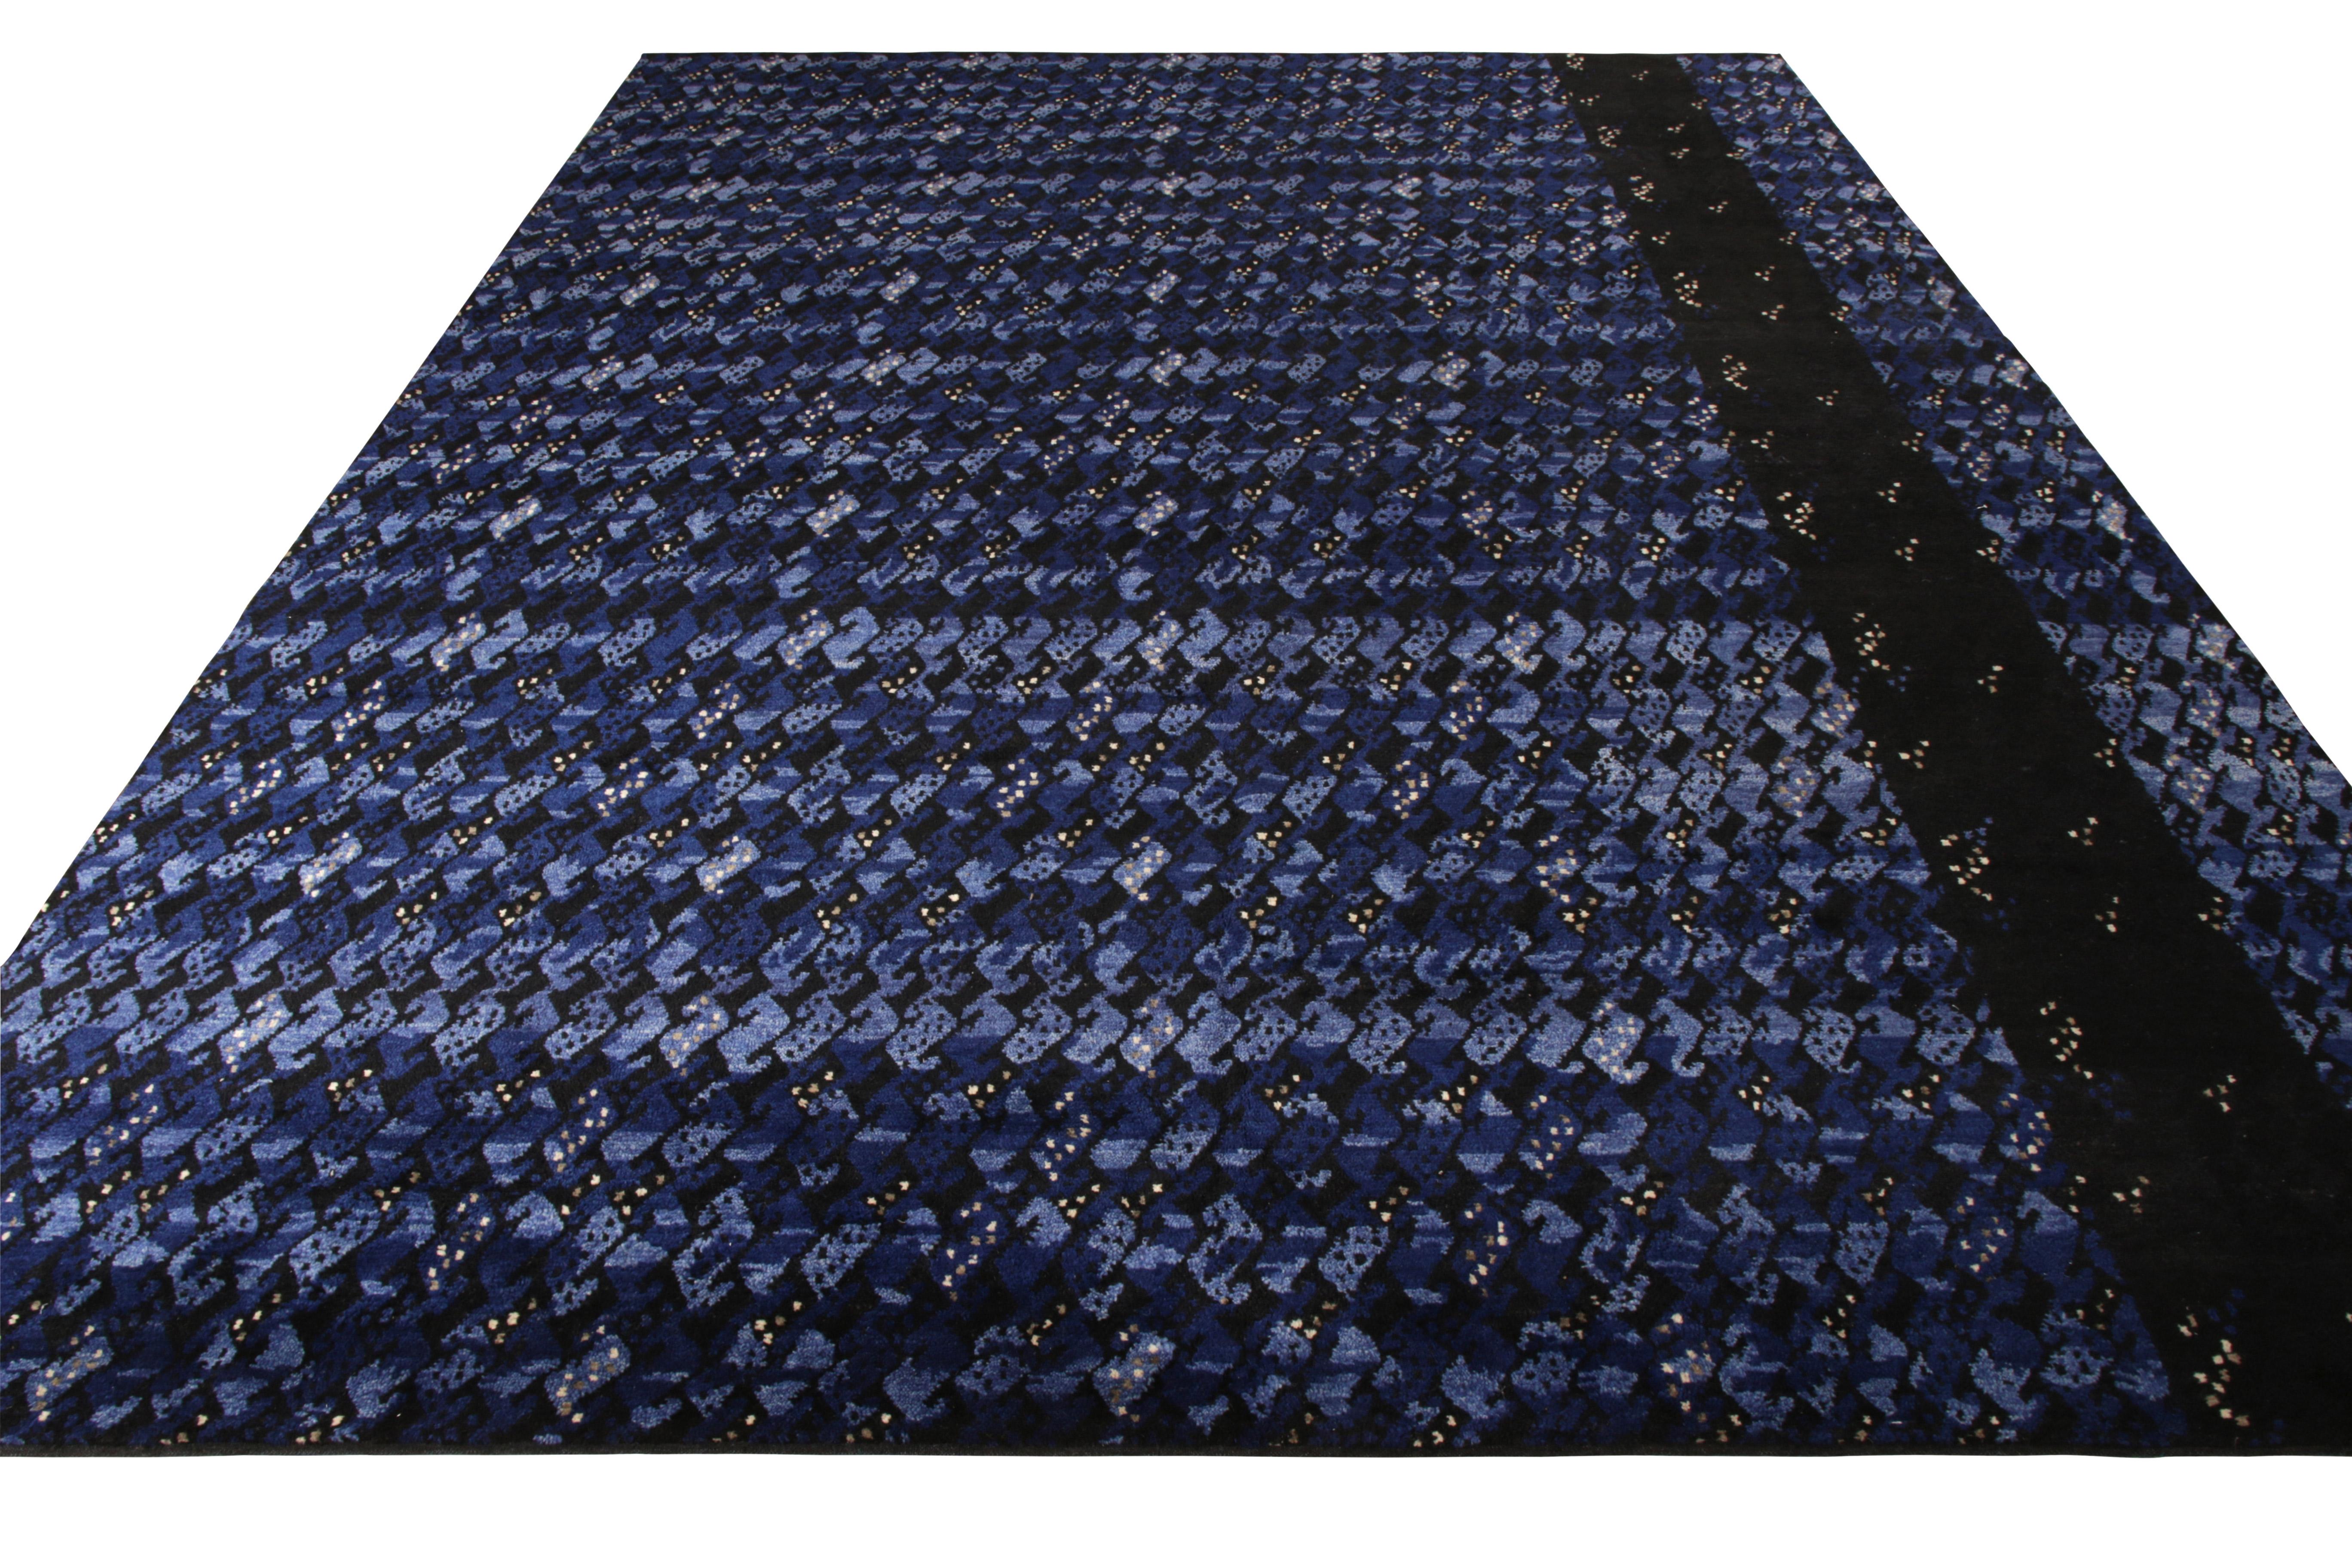 Hailing from Rug & Kilim’s Scandinavian pile collection, a 10x14 rug boasting a refined geometric pattern prevailing in hues of blue for a graceful sense of movement. The rug gets an added dimension with a thick black stripe that gracefully